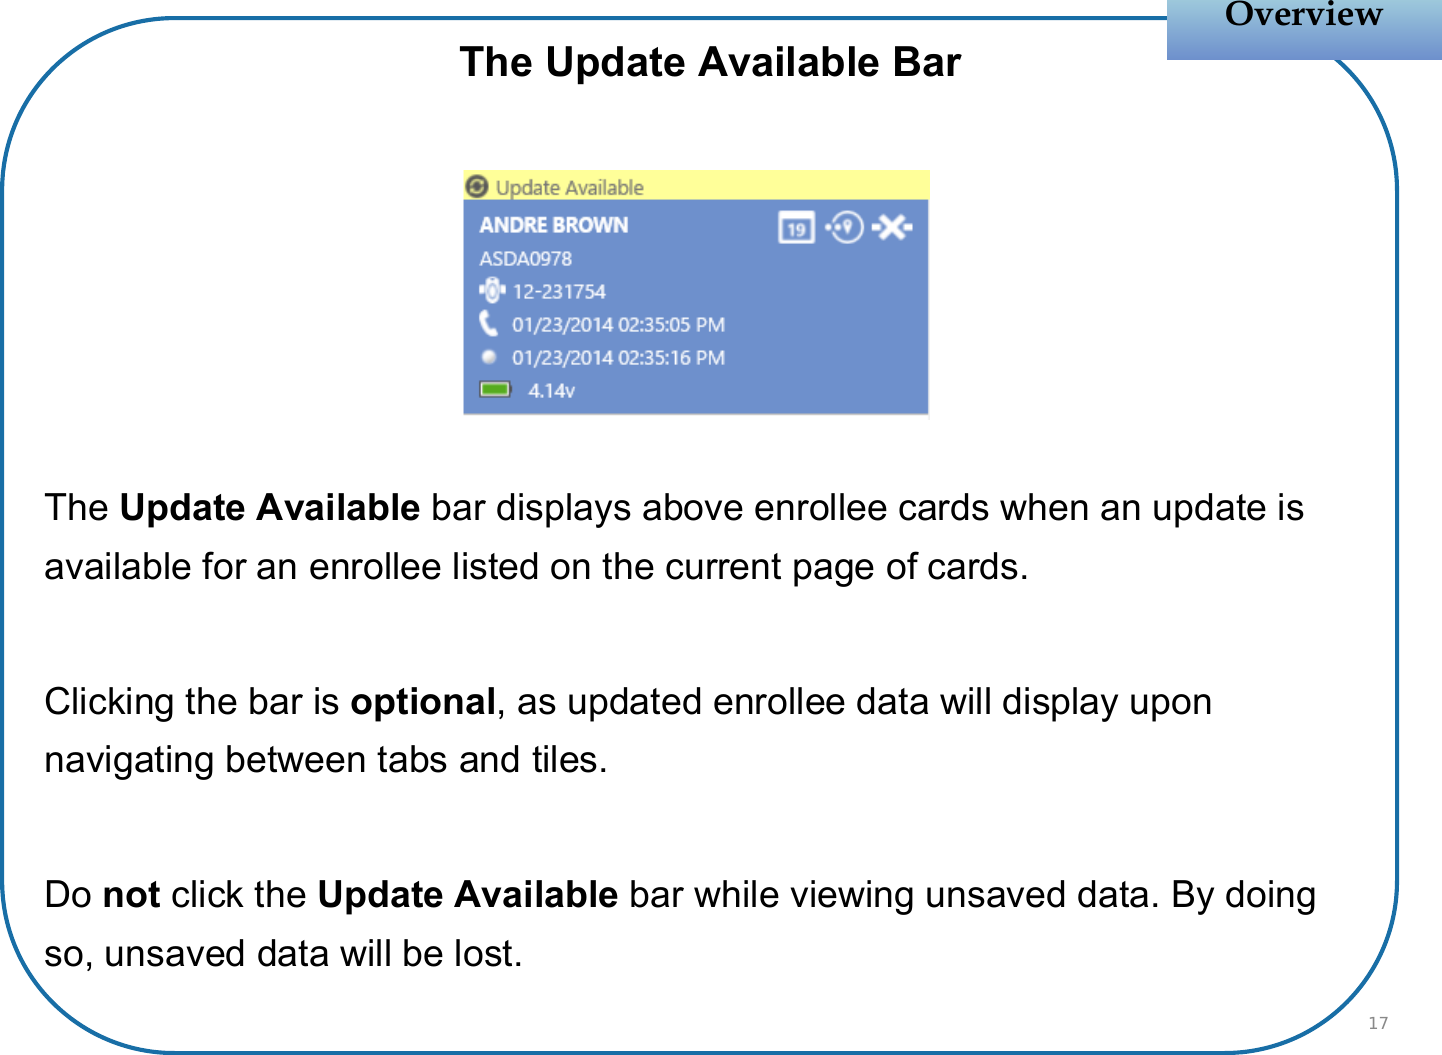 The Update Available BarThe Update Available bar displays above enrollee cards when an update is available for an enrollee listed on the current page of cards.Clicking the bar is optional, as updated enrollee data will display upon navigating between tabs and tiles.Do not click the Update Available bar while viewing unsaved data. By doing so, unsaved data will be lost.OverviewOverview17